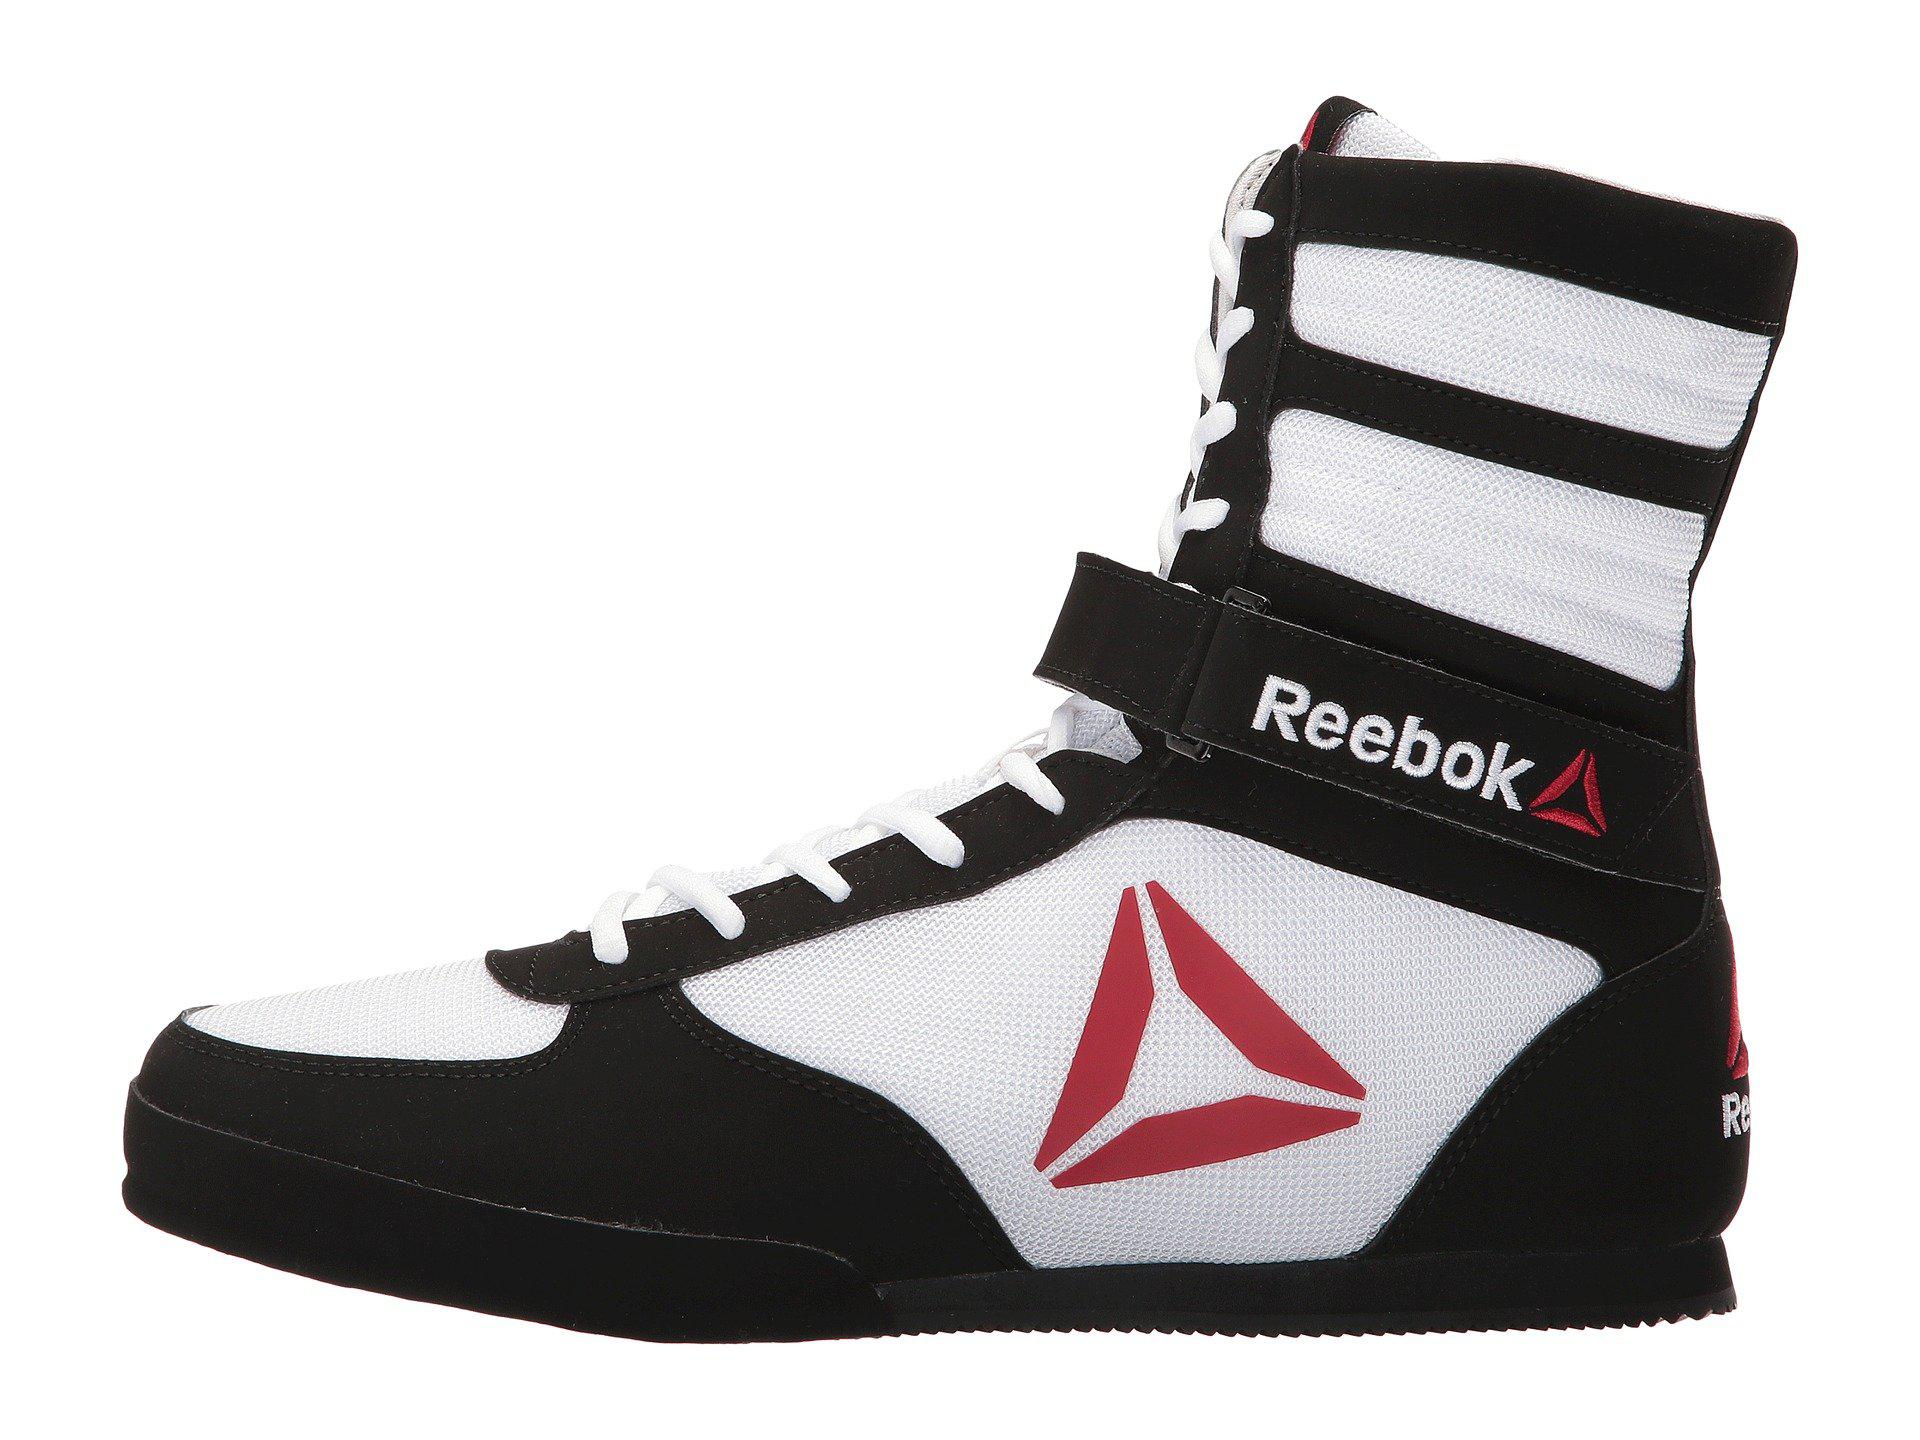 Boxing Boot (white/black) Men's Shoes for